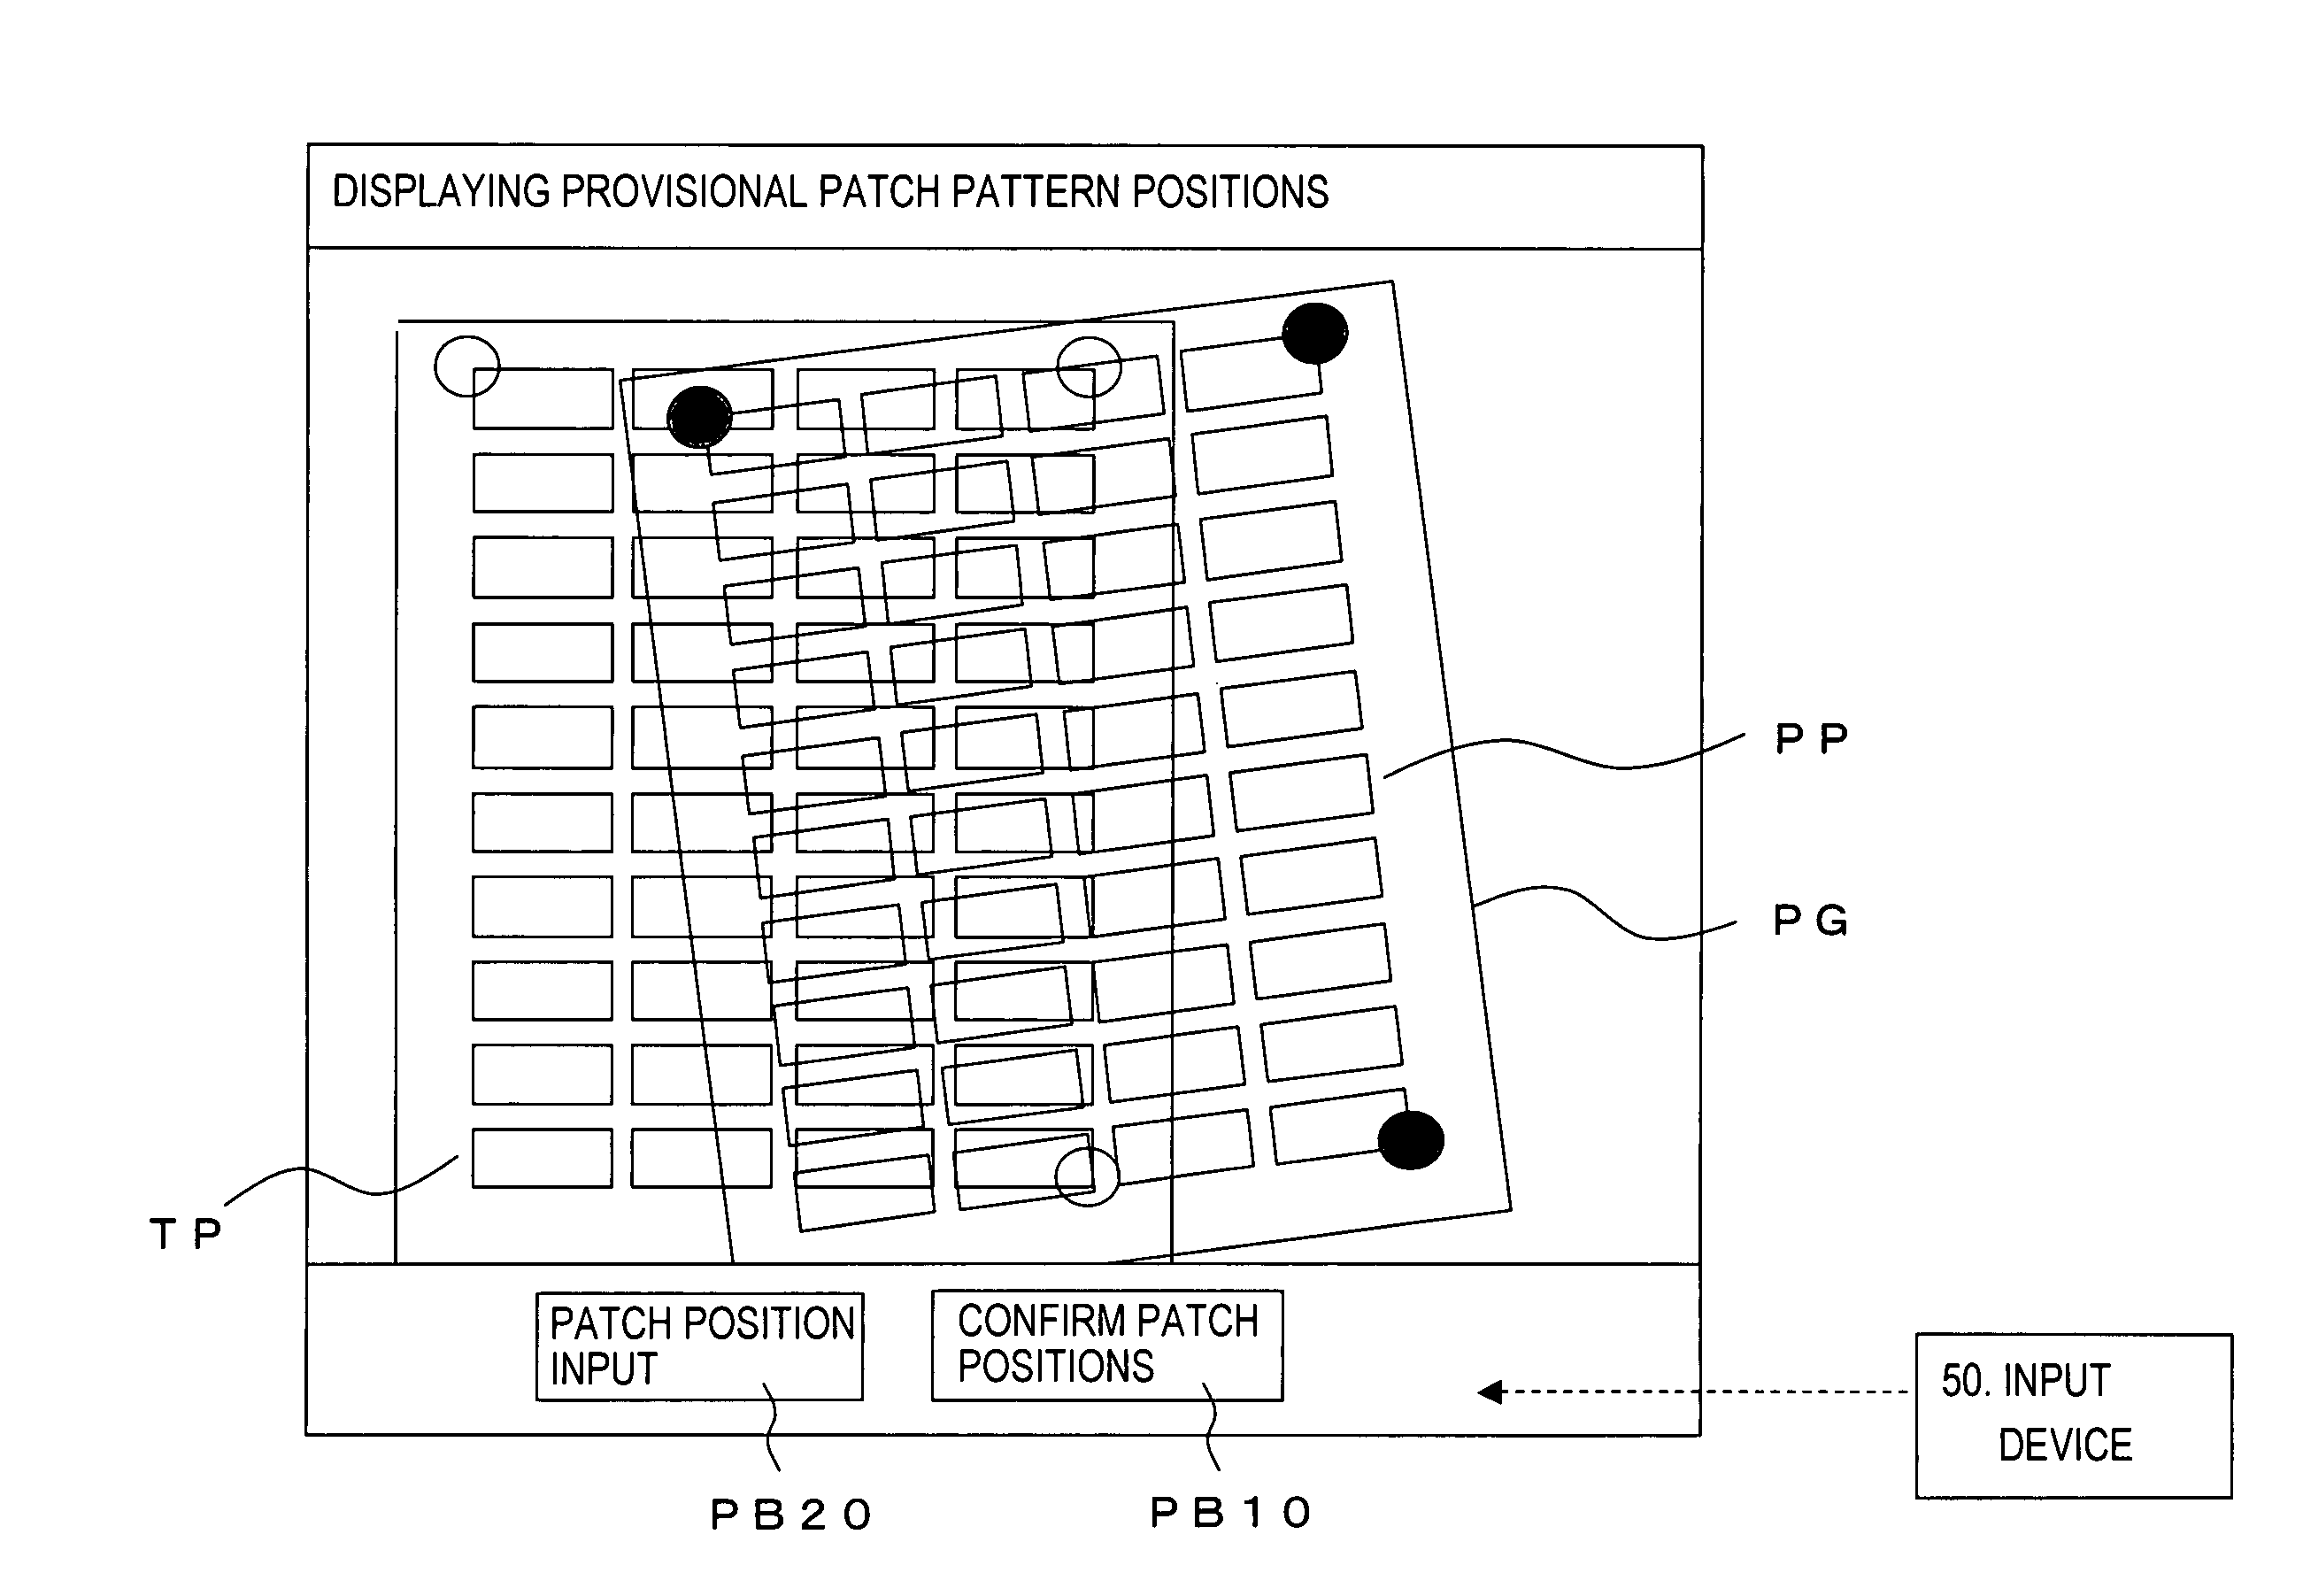 Computer readable medium recording a calibration program, calibration method, and calibration system for detecting patch positions during acquisition of calorimetric values from a patch sheet